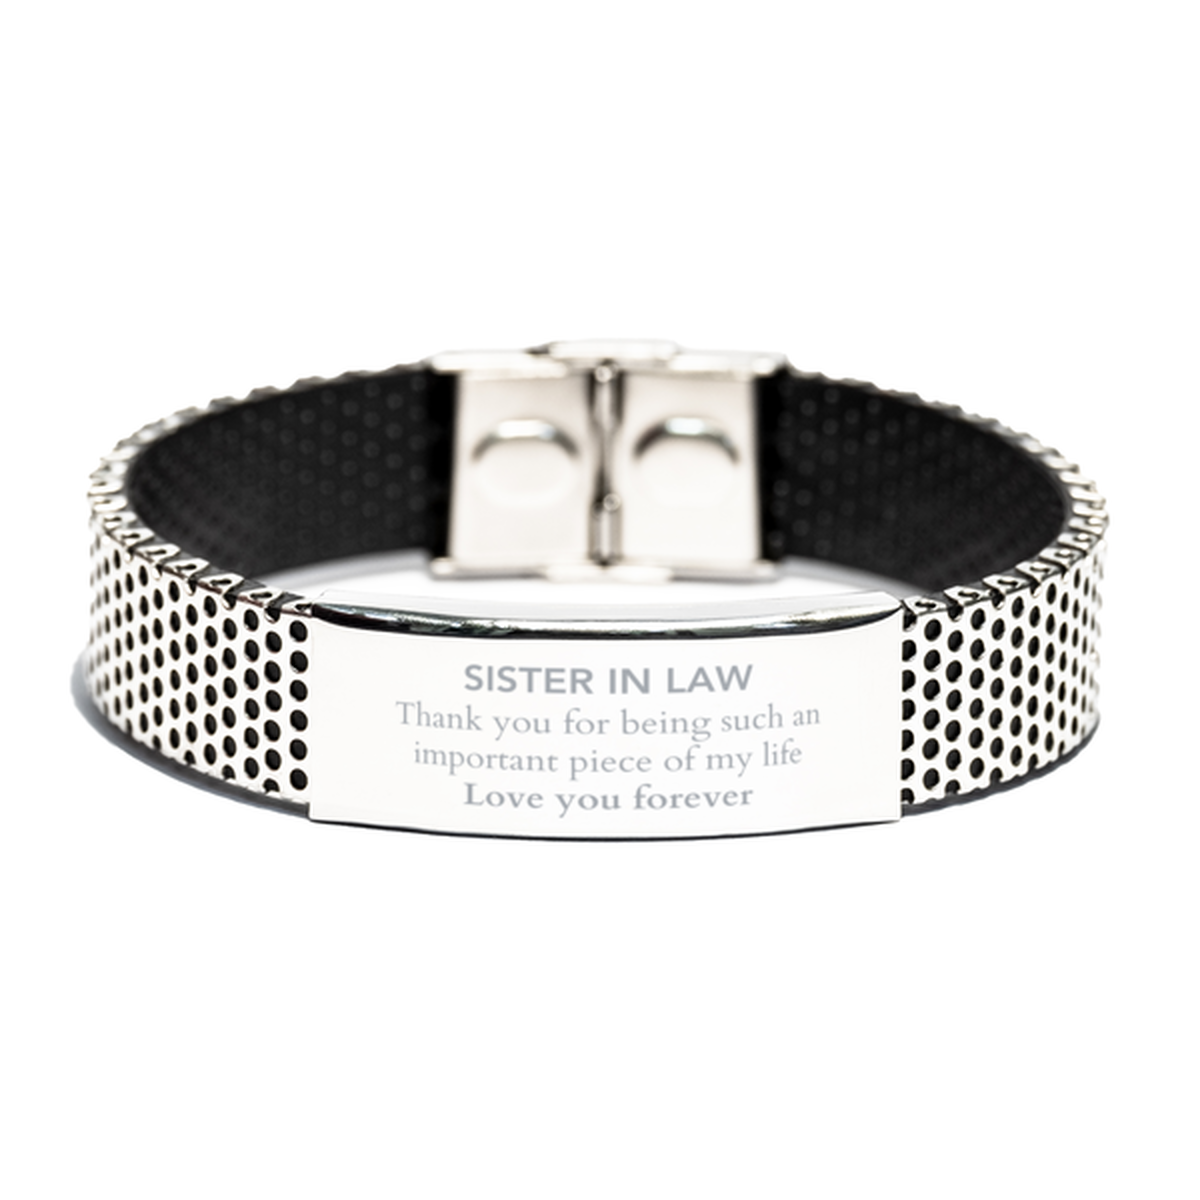 Appropriate Sister In Law Stainless Steel Bracelet Epic Birthday Gifts for Sister In Law Thank you for being such an important piece of my life Sister In Law Christmas Mothers Fathers Day